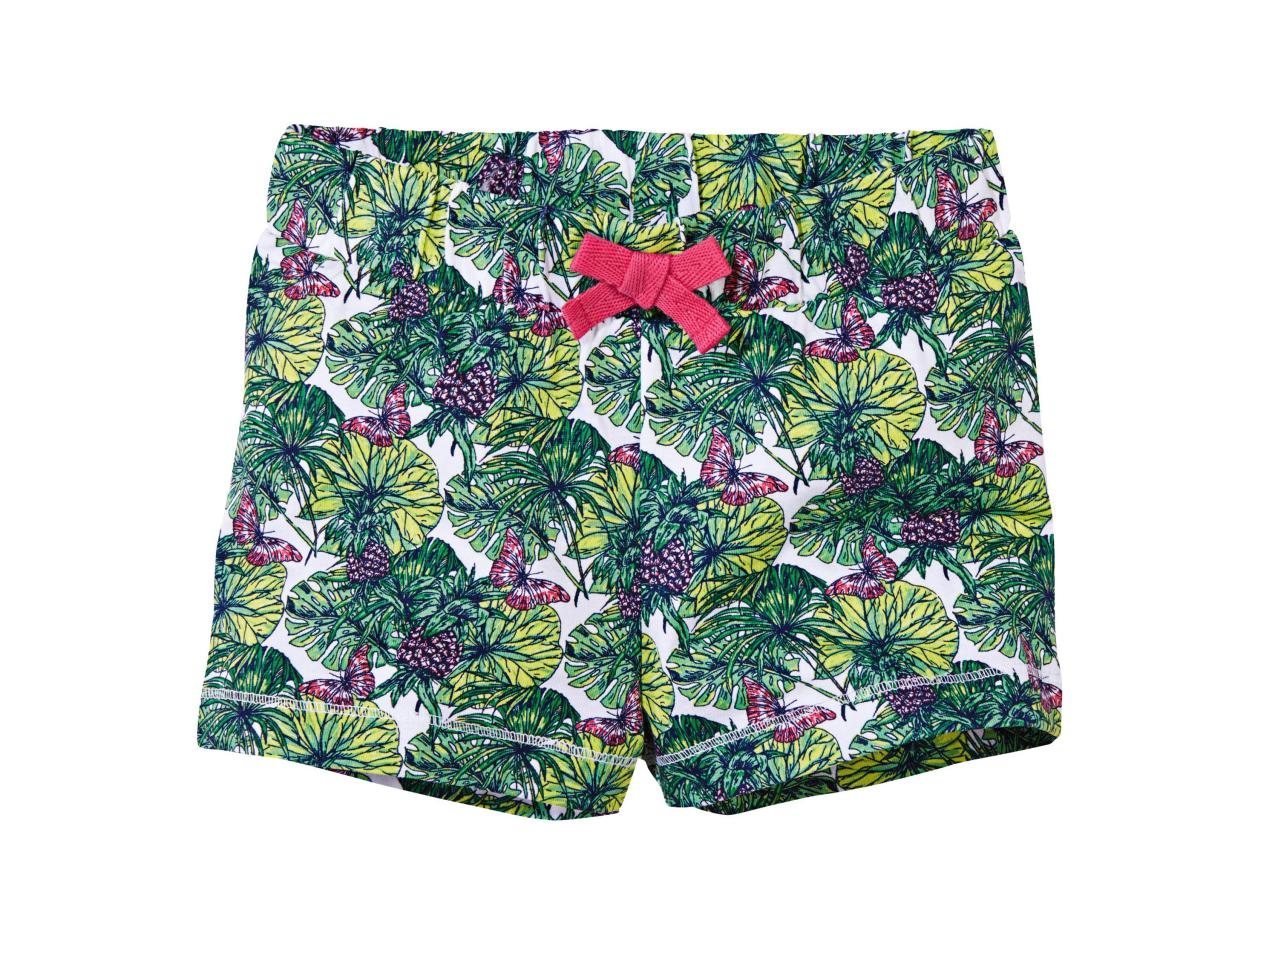 Girls' Shorts, 2 pieces